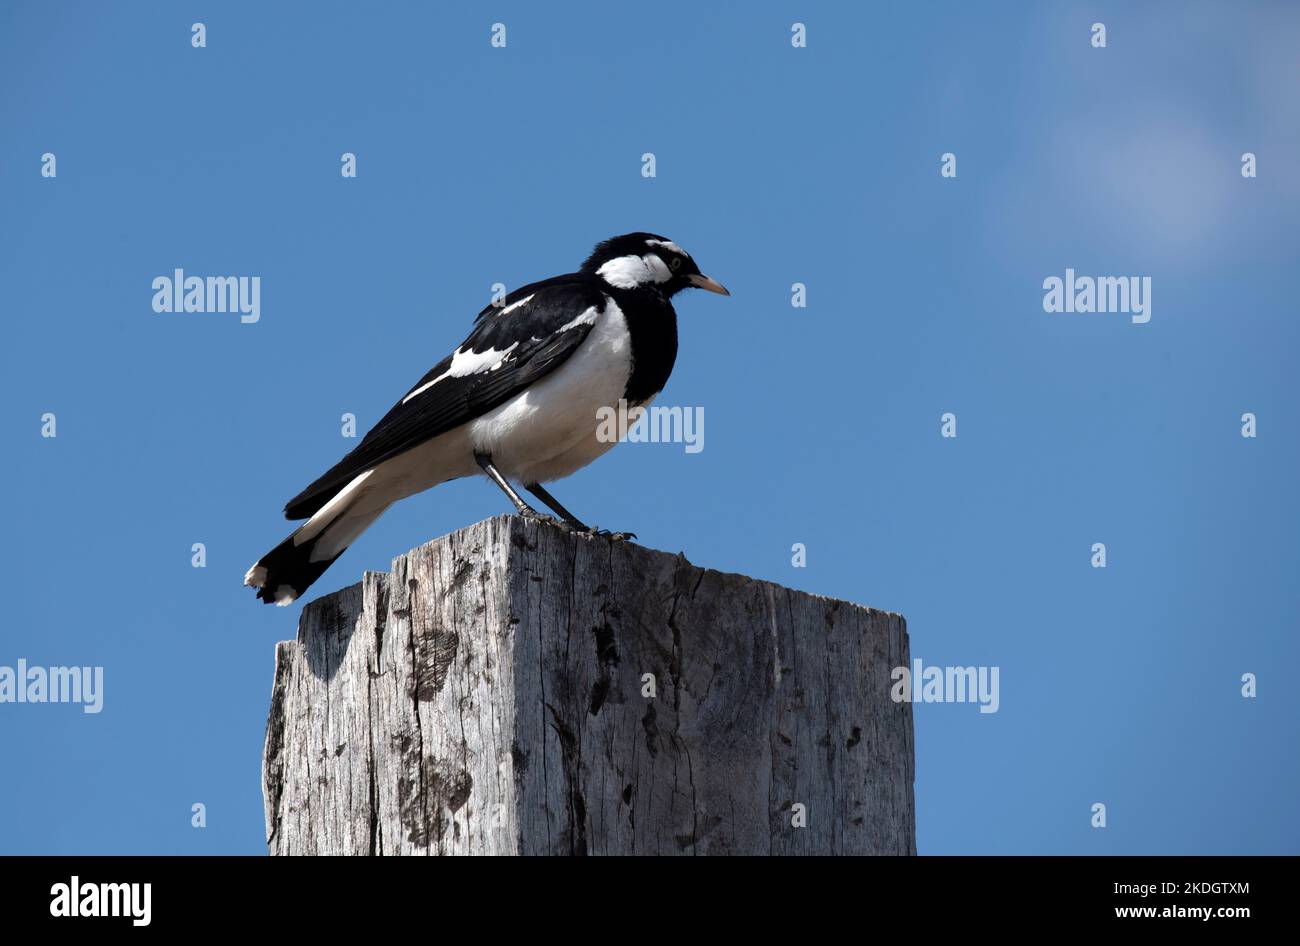 A Magpie-lark (Grallina cyanoleuca) perched on a wooden stand in Sydney, NSW, Australia (Photo by Tara Chand Malhotra) Stock Photo